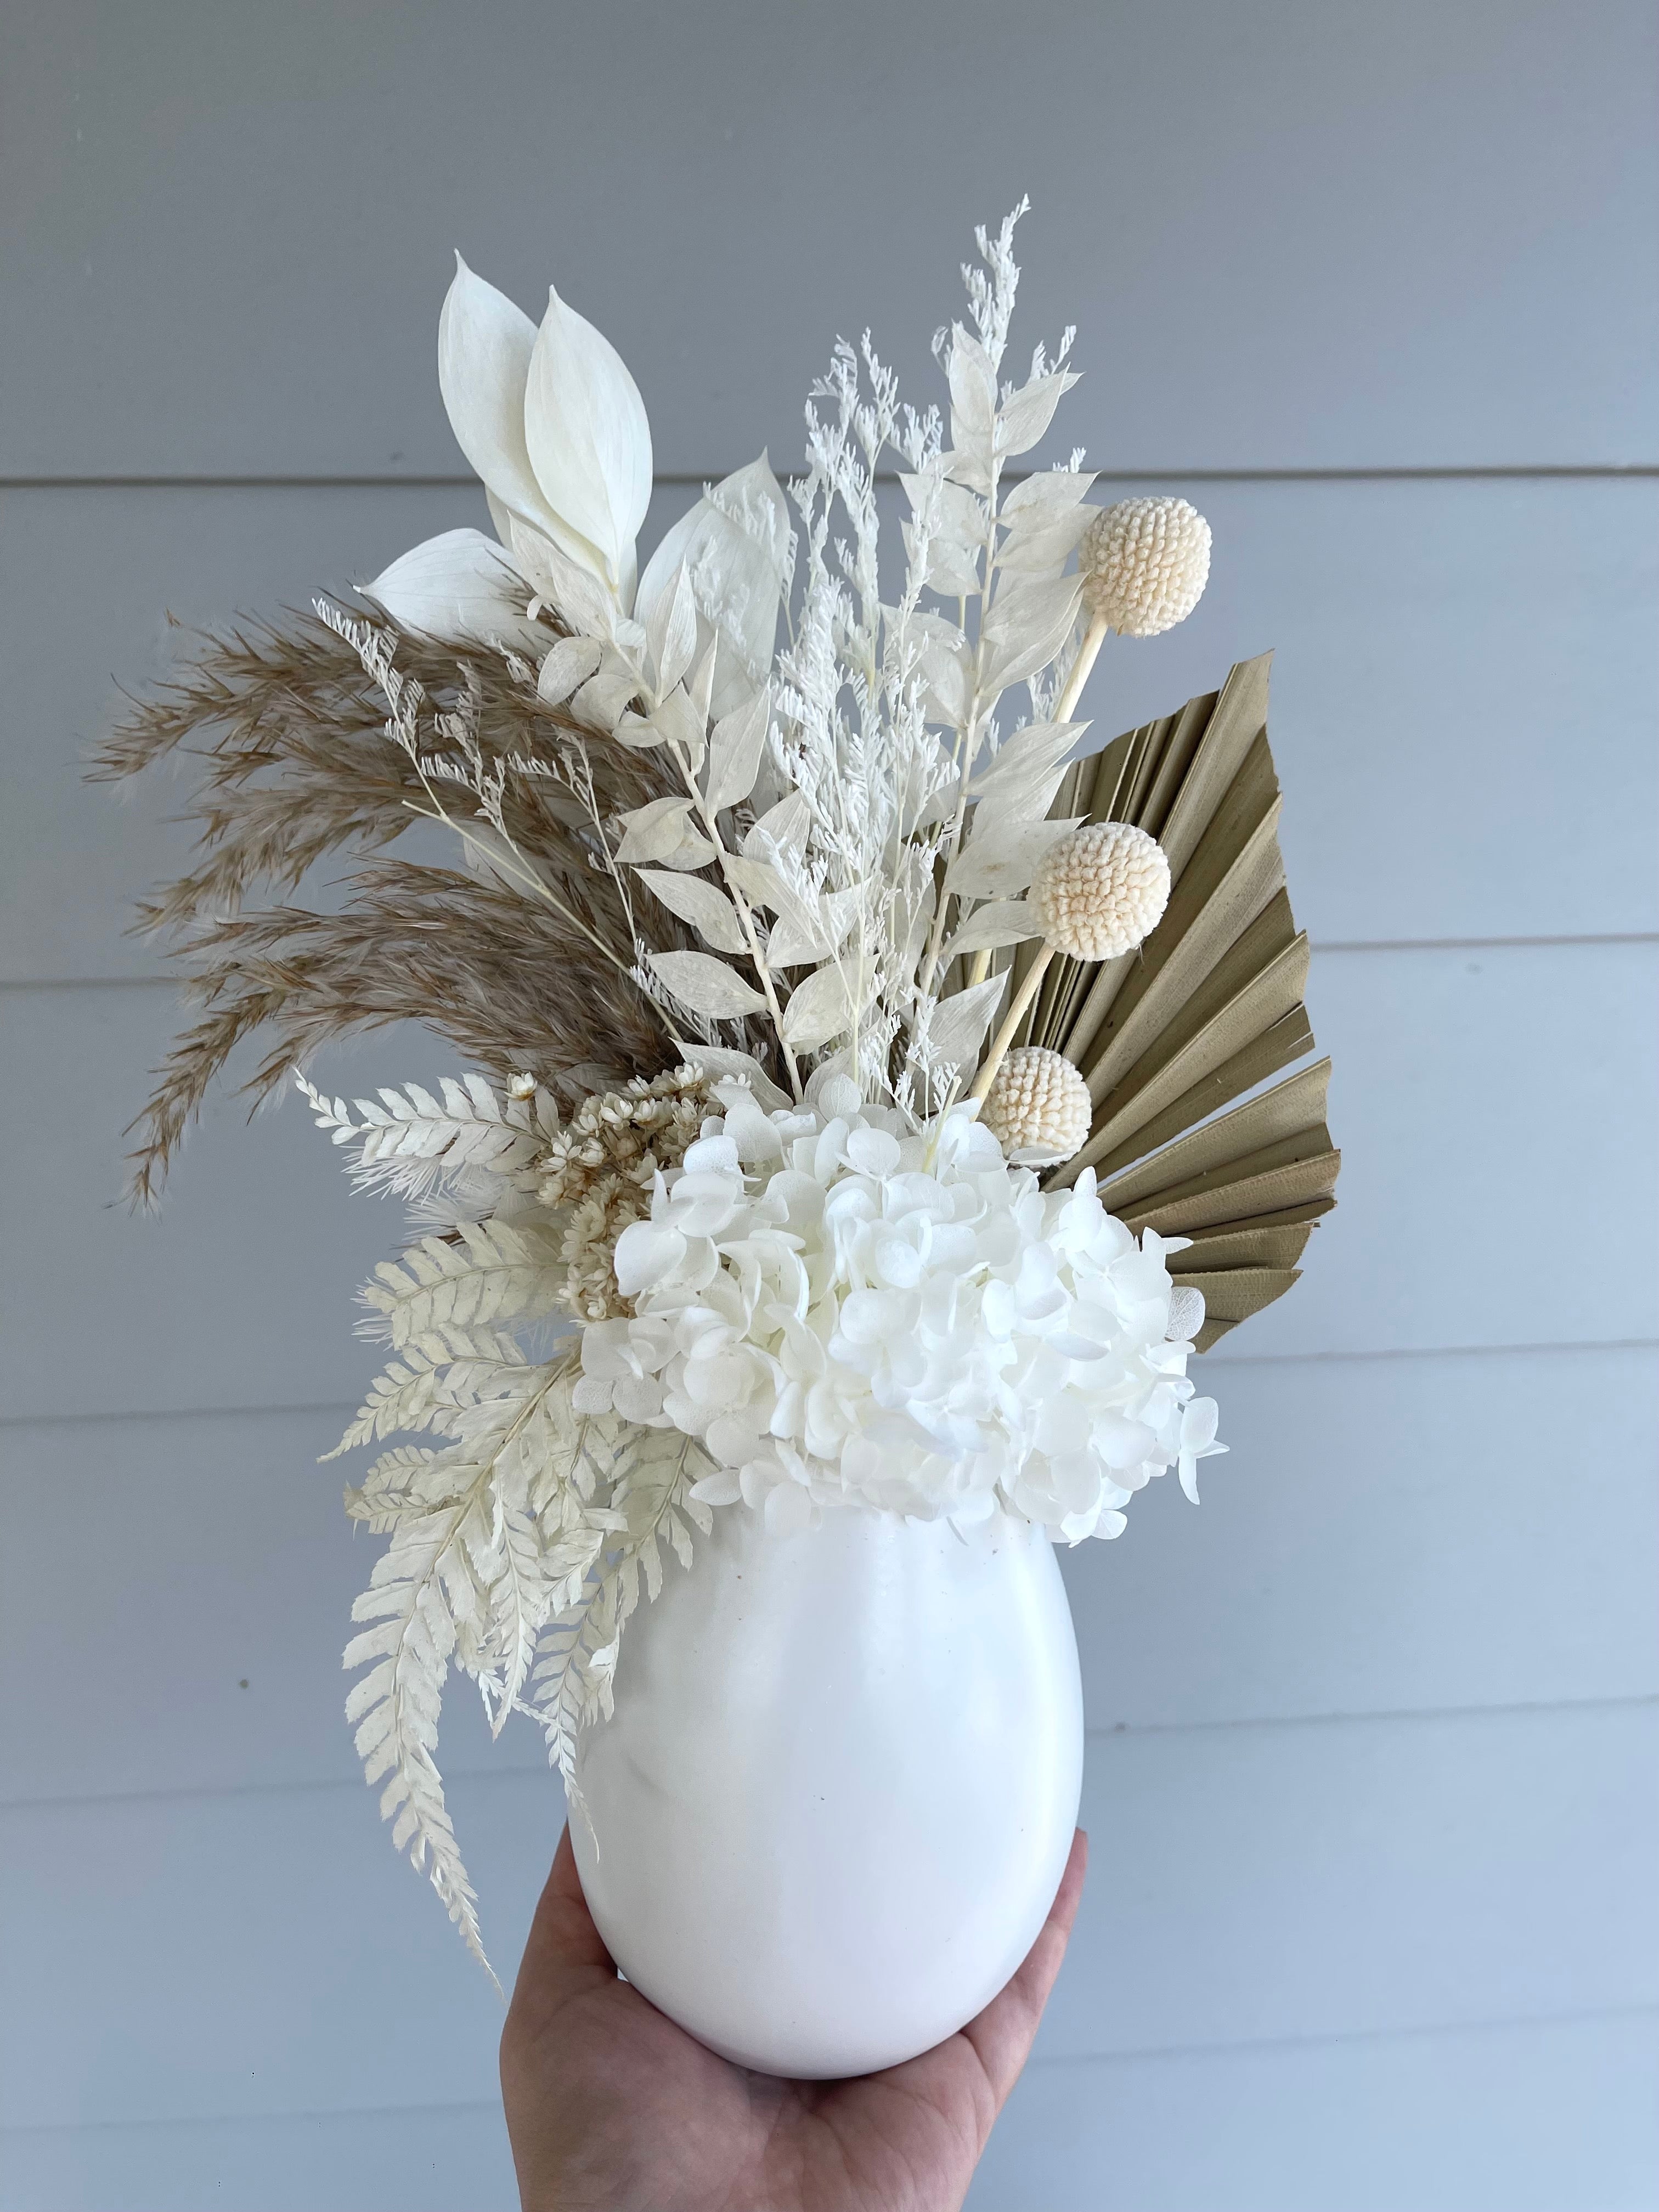 Everlasting vase arrangement - small -white/natural/billy buttons.